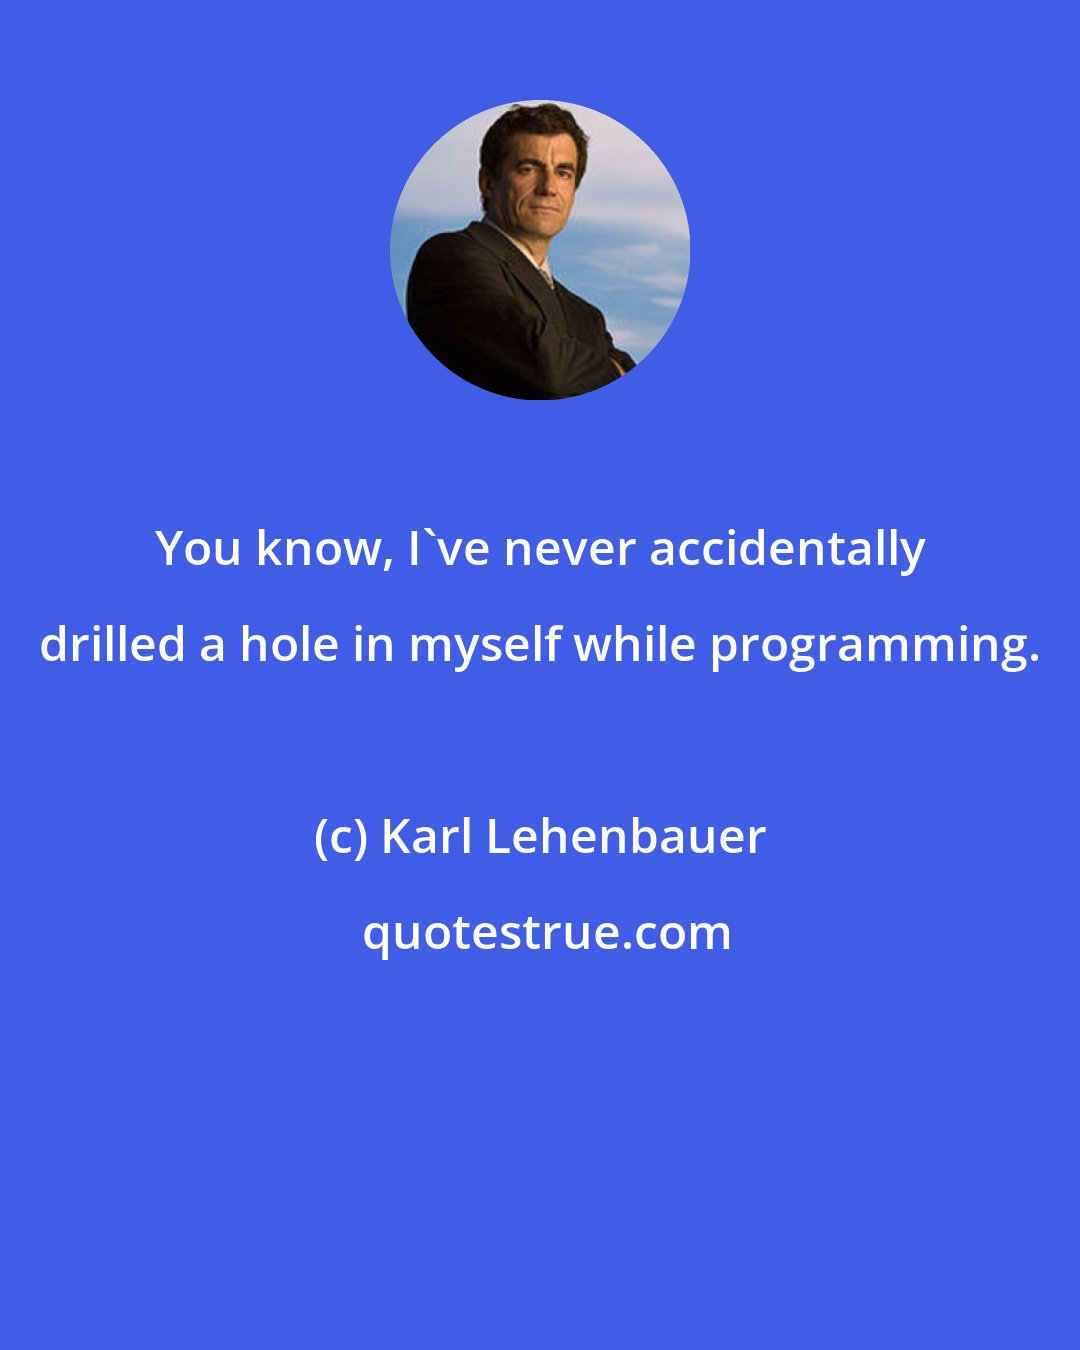 Karl Lehenbauer: You know, I've never accidentally drilled a hole in myself while programming.